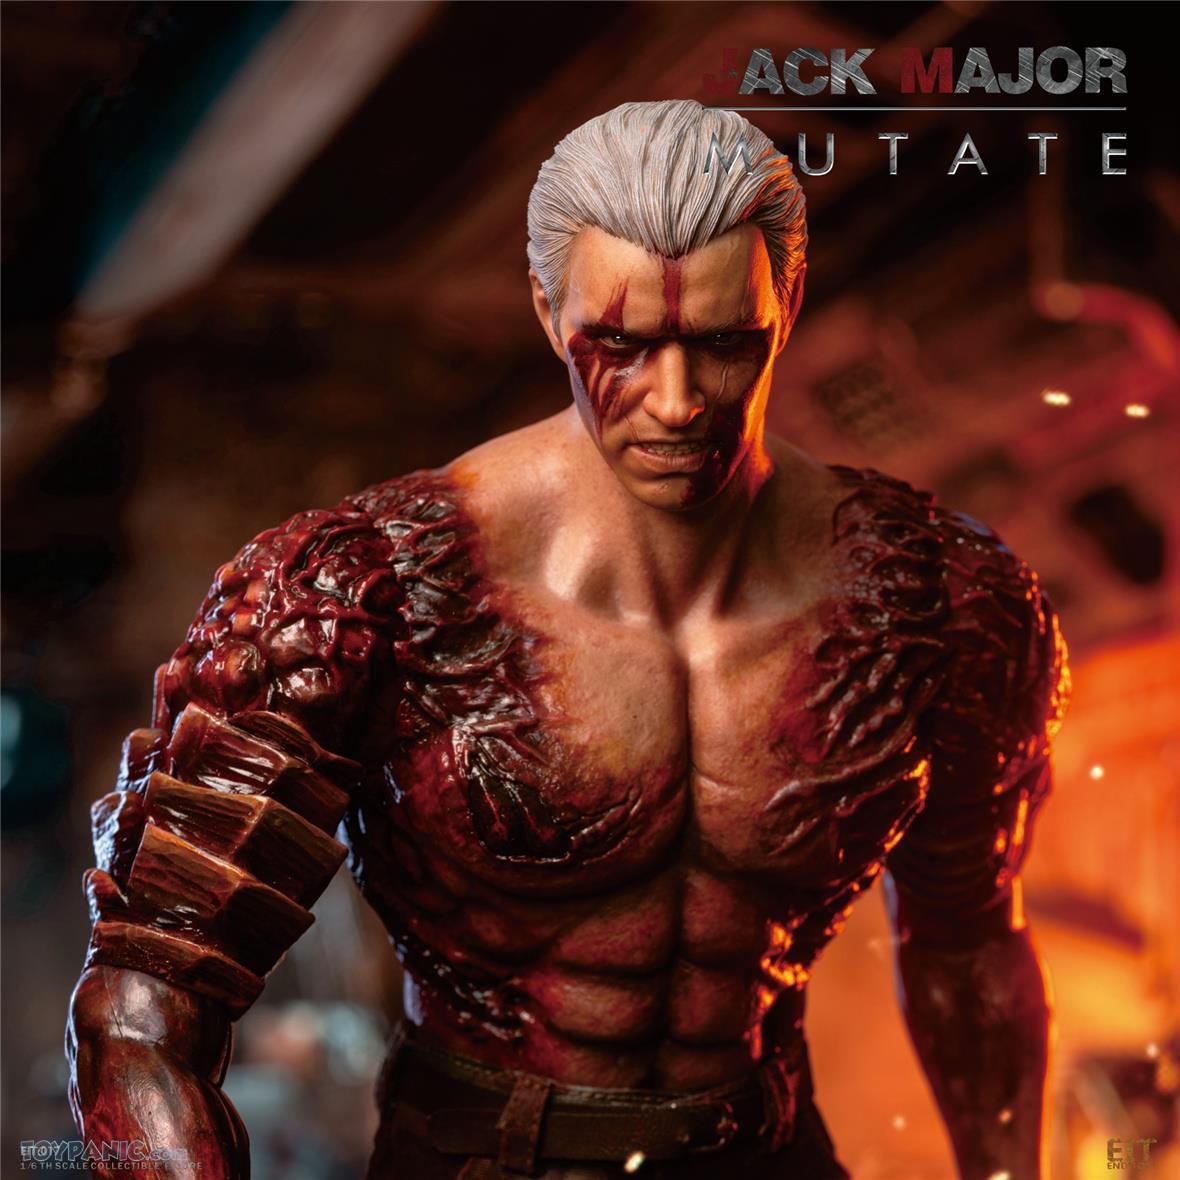 jackmajor - NEW PRODUCT:  1/6 Jack Major Mutate from End I Toys  2732024105954AM_1069441